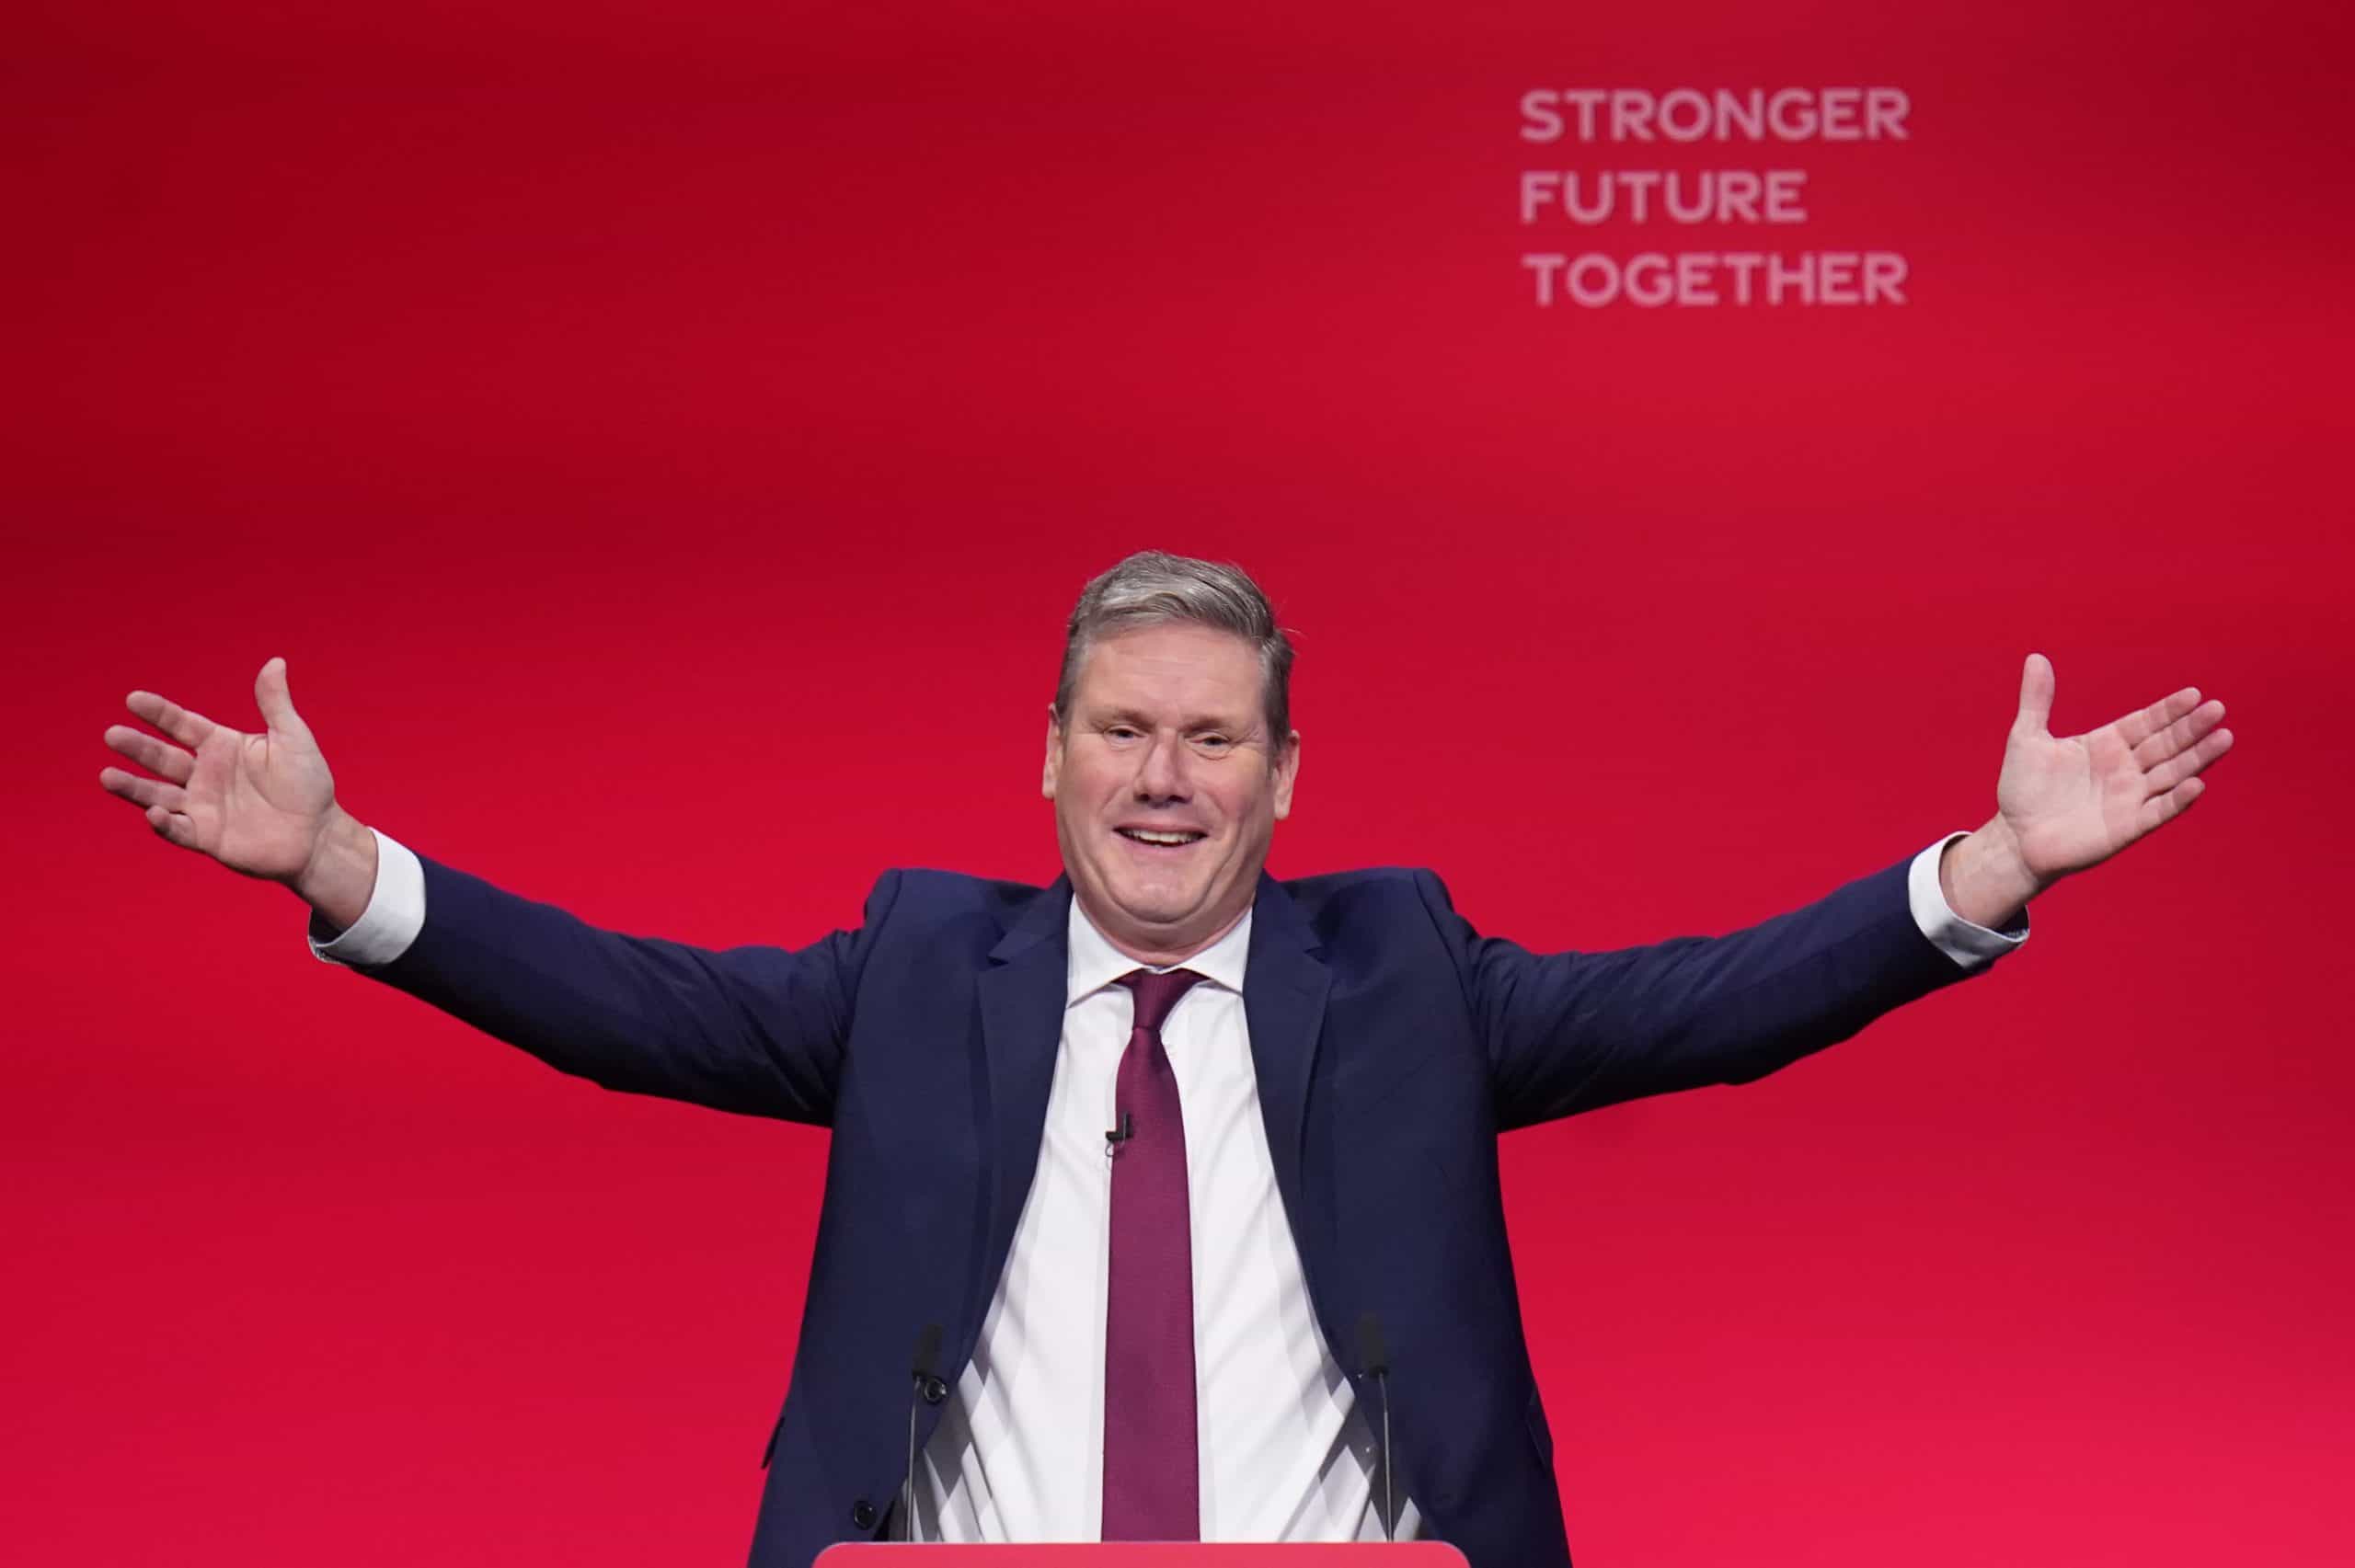 Labour vote share falls following Starmer’s Conference speech and tough week for the Tories